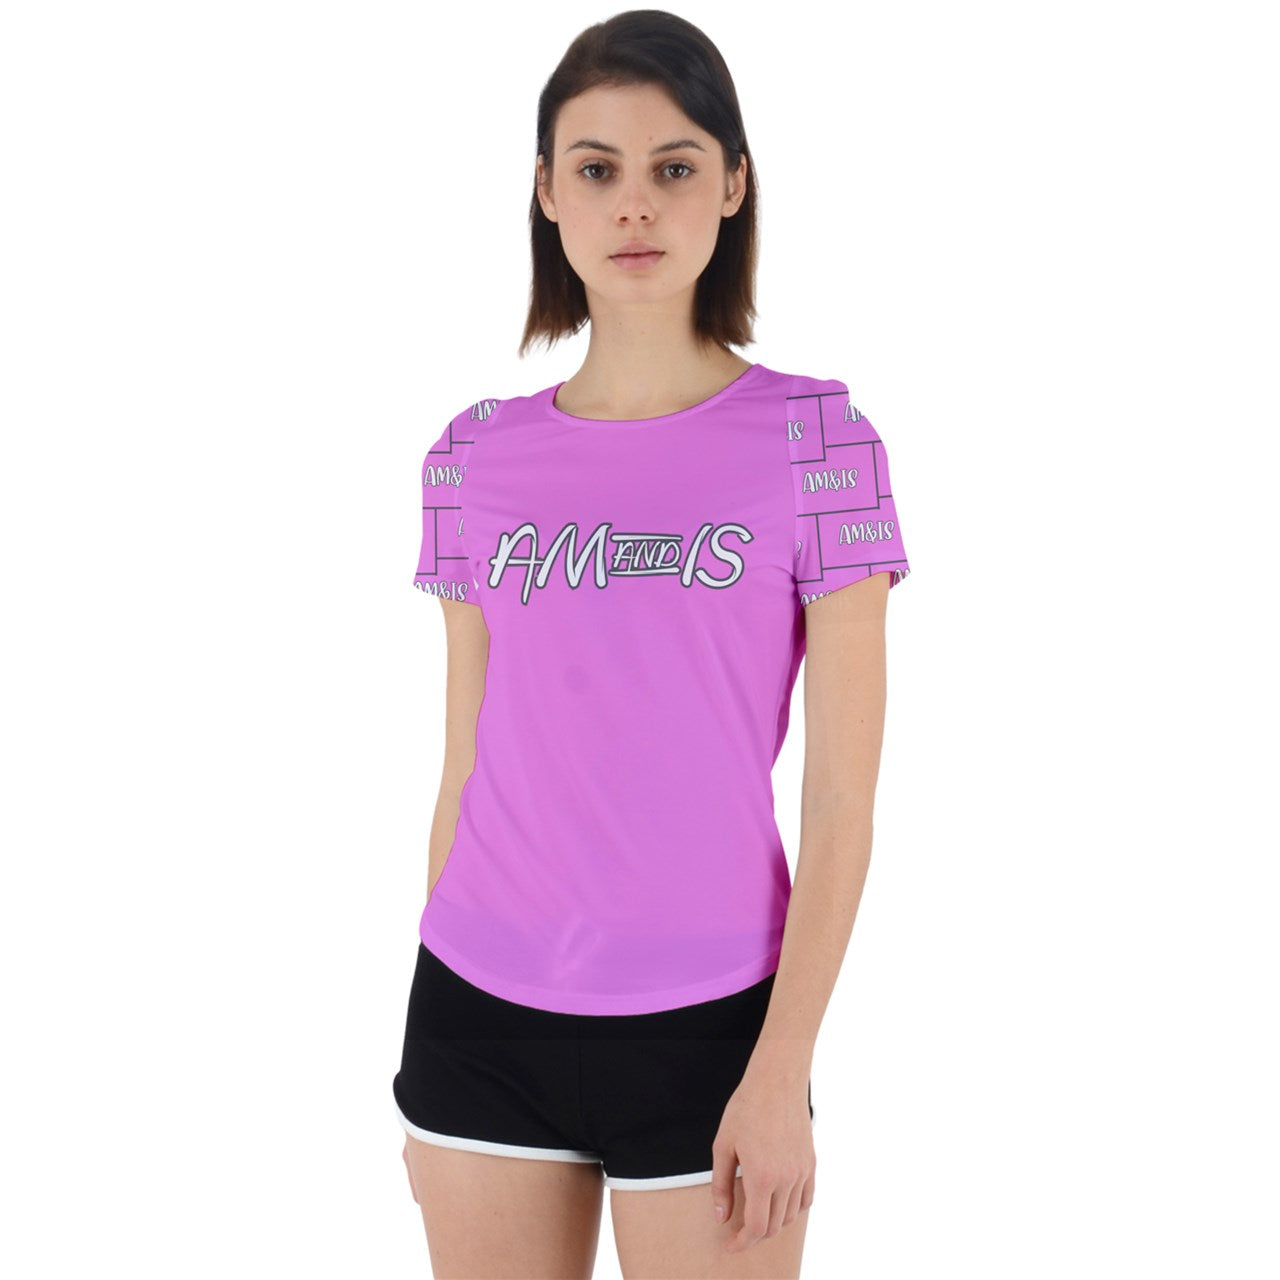 PINK - Am&Is Activewear Back Cut Out Sport Tee - 4 colors - womens t-shirt at TFC&H Co.